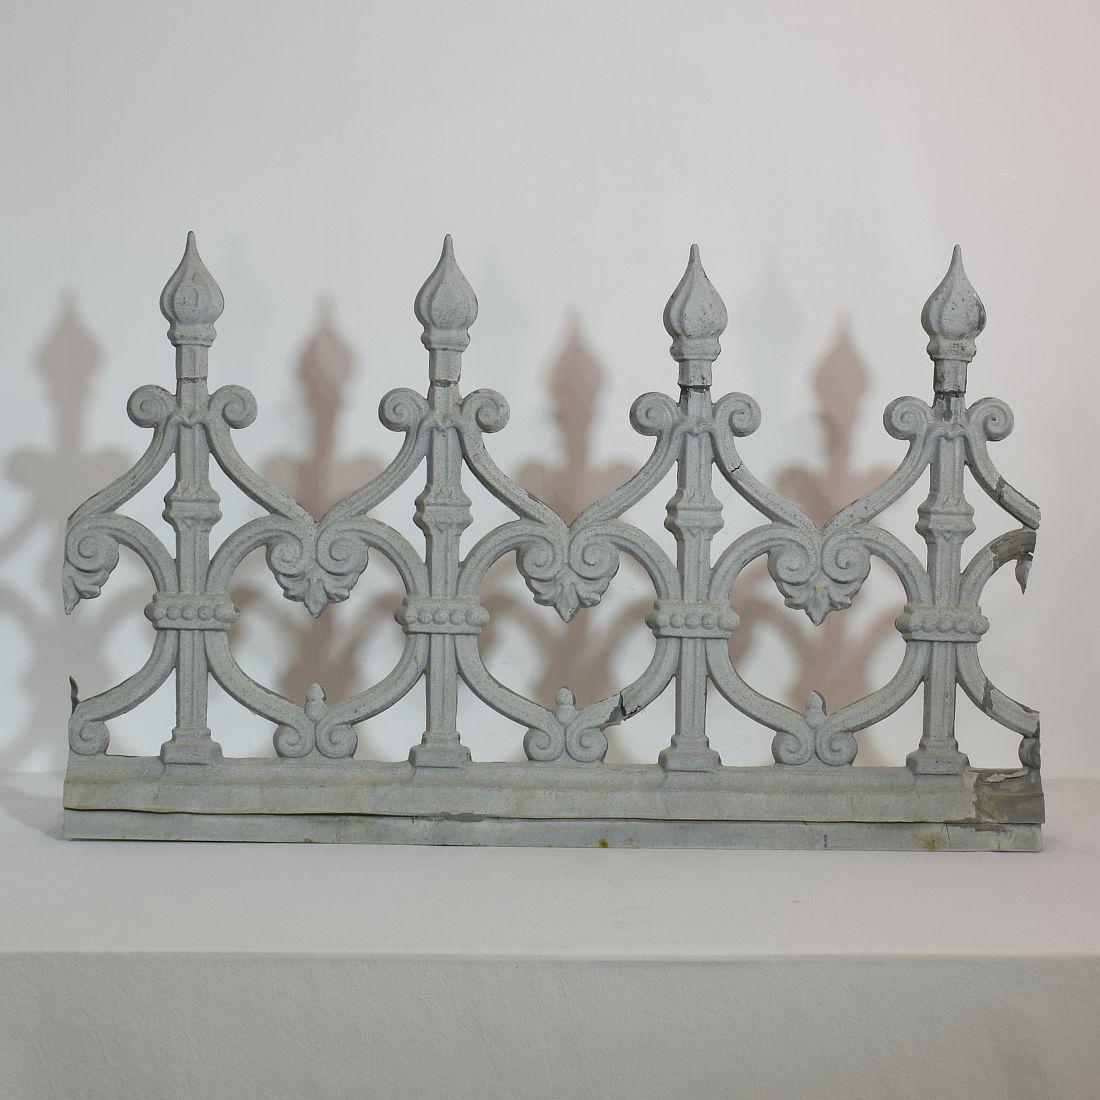 Pair of 19th Century French Zinc Architectural Roof Ornaments or Finials 10